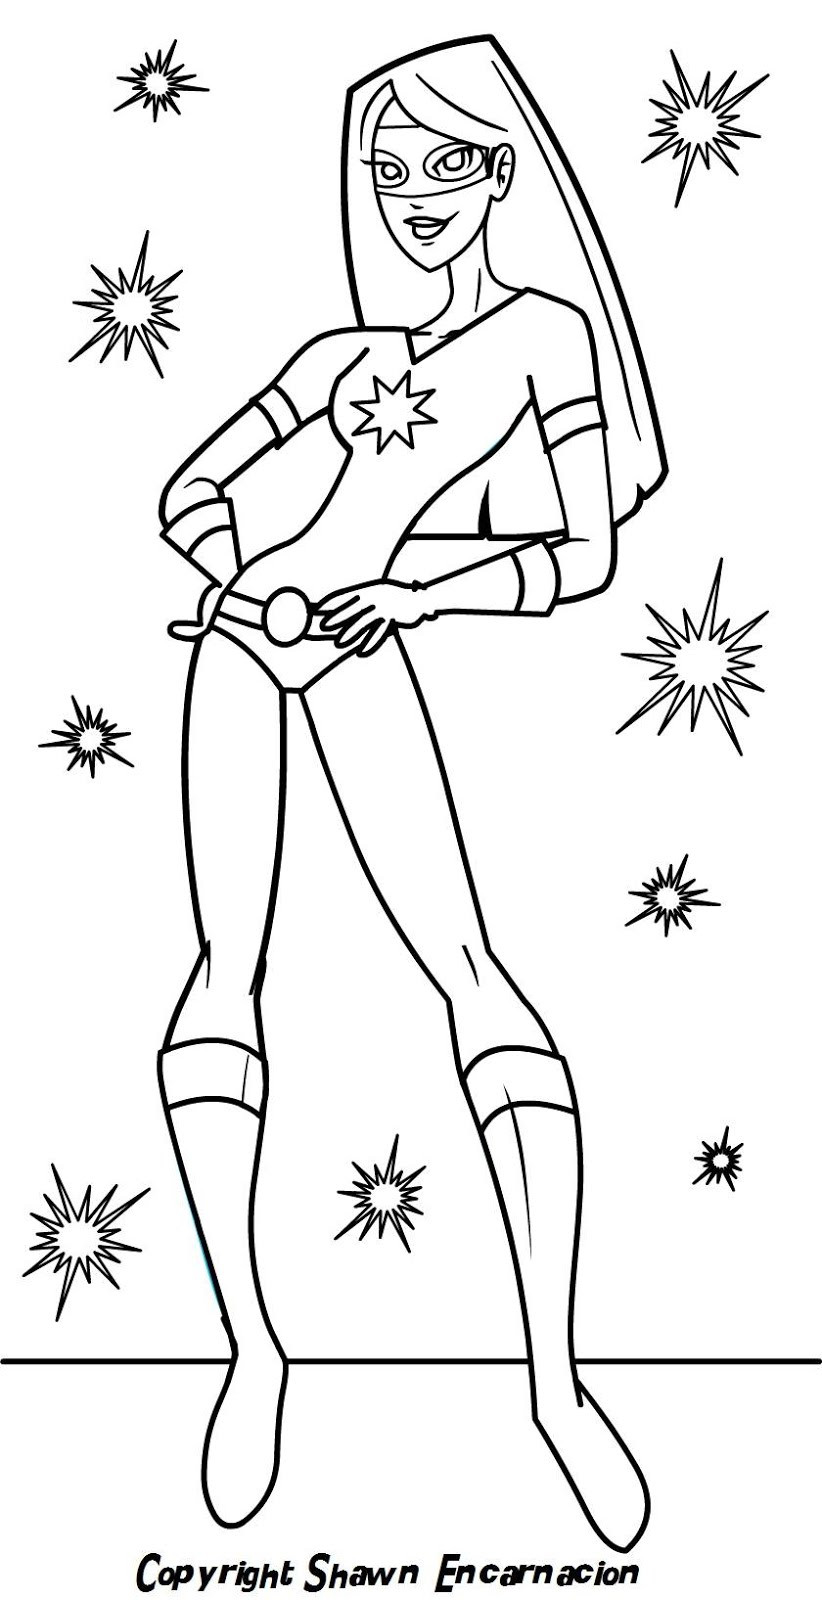 Girl Superhero Coloring Pages Free
 Female Superhero Coloring Pages